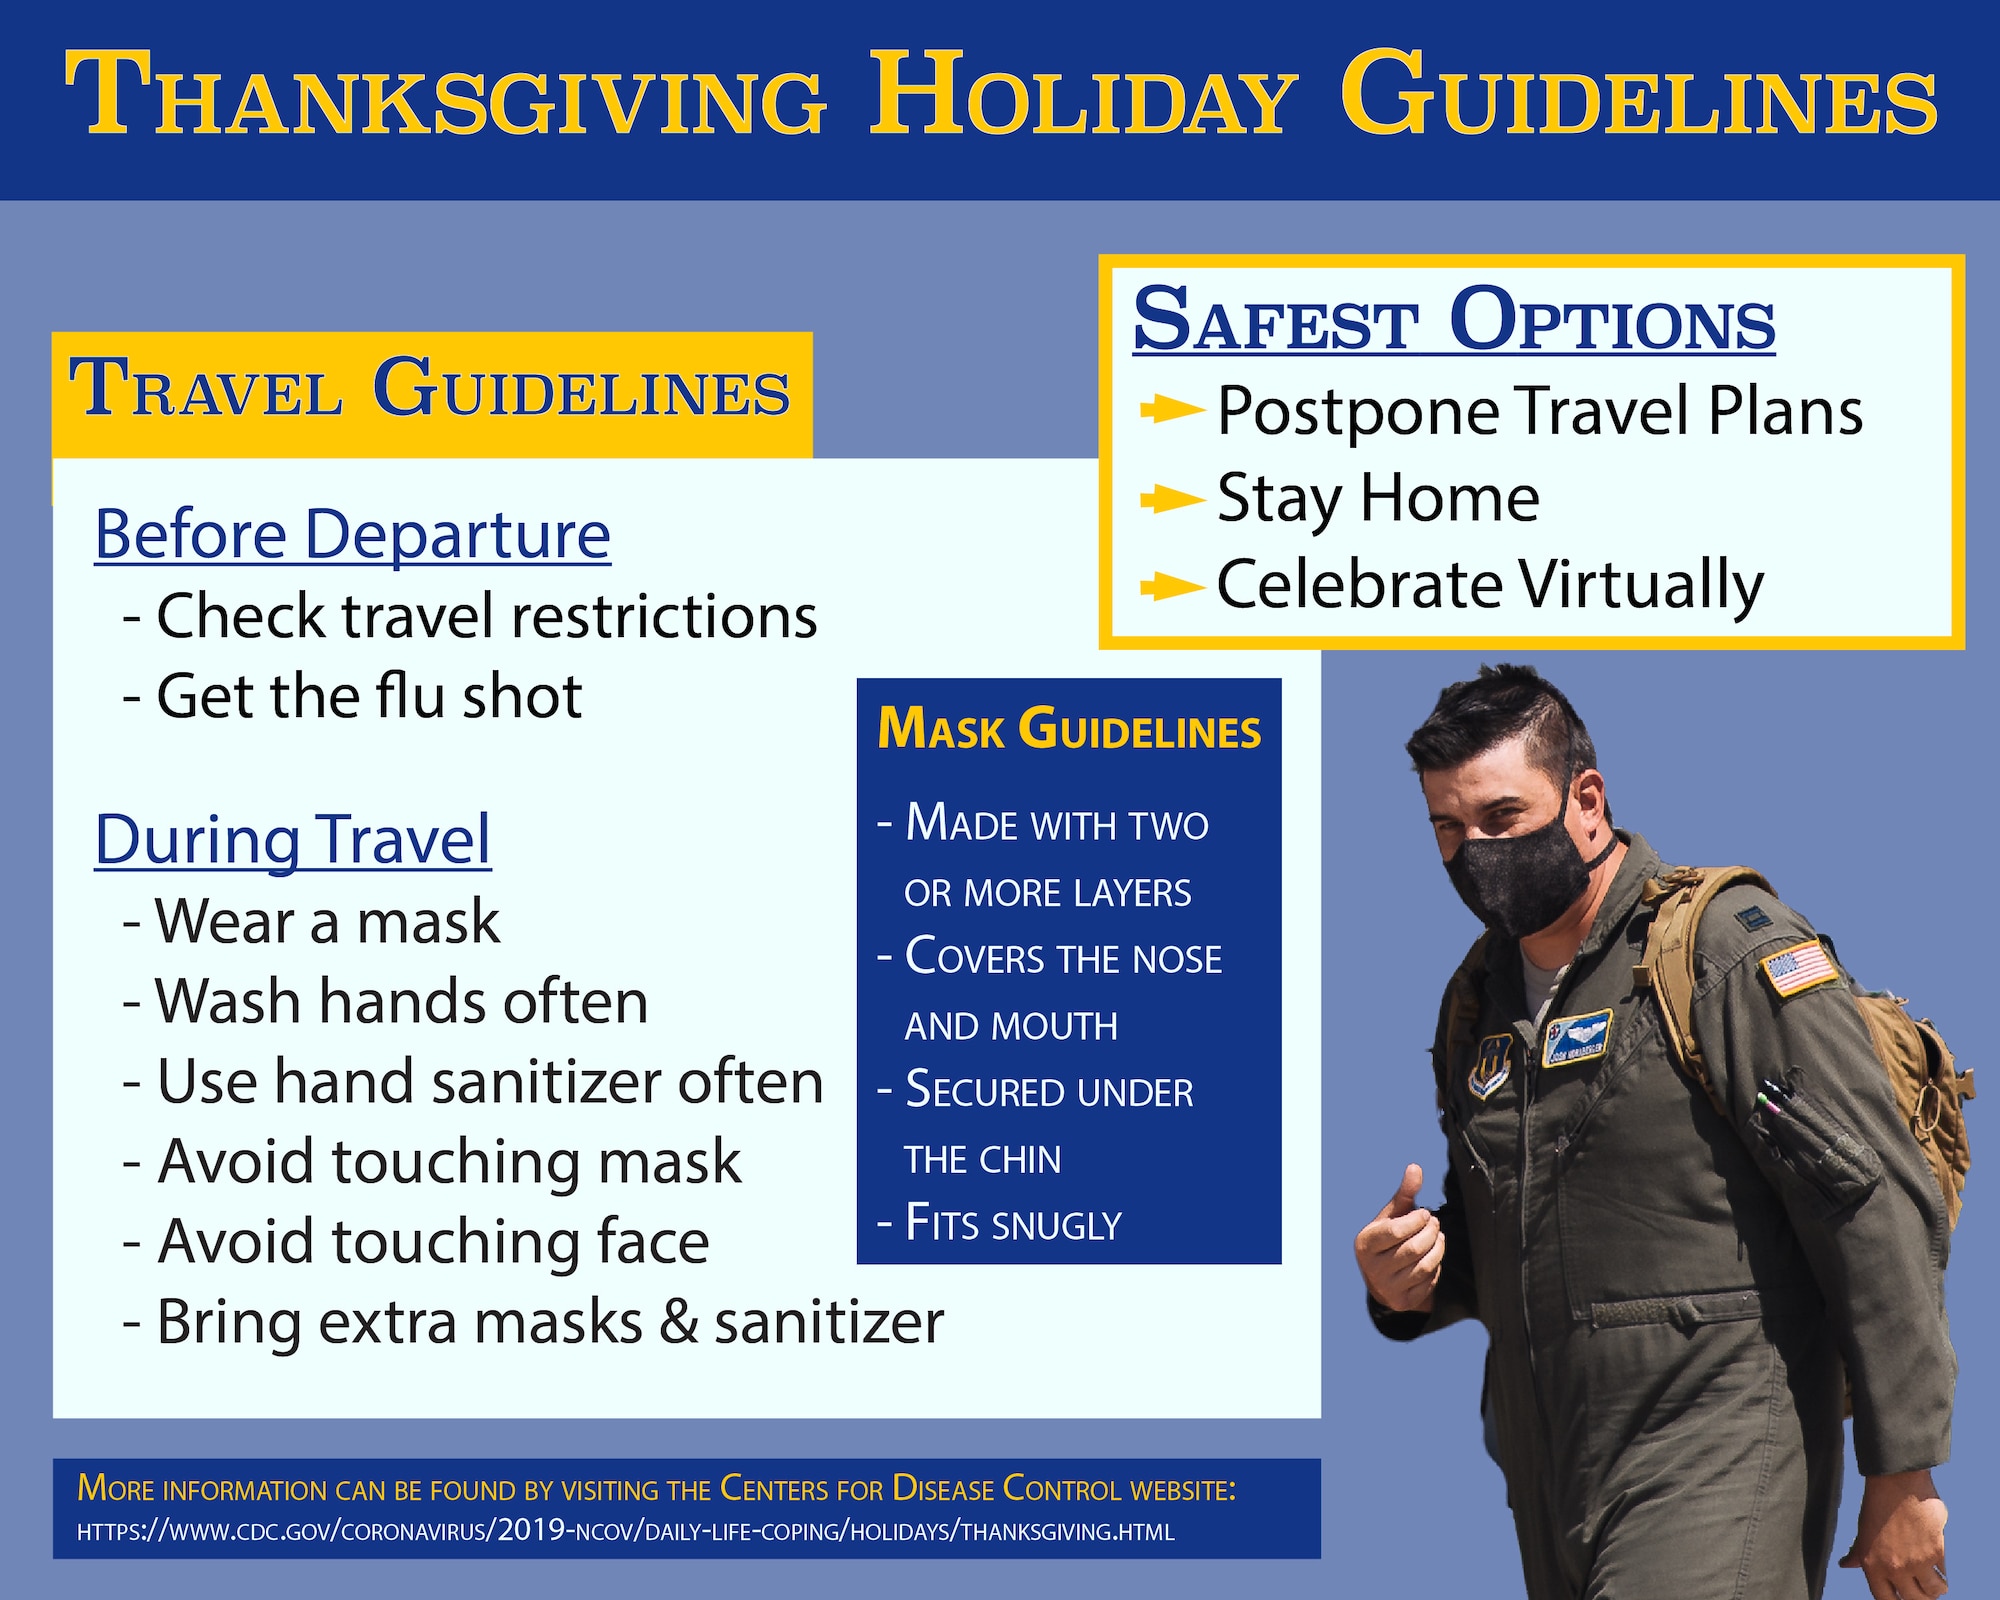 An infographic describing guidelines published Nov. 19, 2020 by the Centers for Disease Control to safely celebrate Thanksgiving. A U.S. Air Force photo of Capt. Joshua Hornberger, 729th AS pilot, taken by Tech. Sgt. Jordan Castelan, 1st Combat Camera Squadron, at March Air Reserve Base, California, was used for the illustration. (U.S. Air National Guard infographic by Senior Airman Neil Mabini)